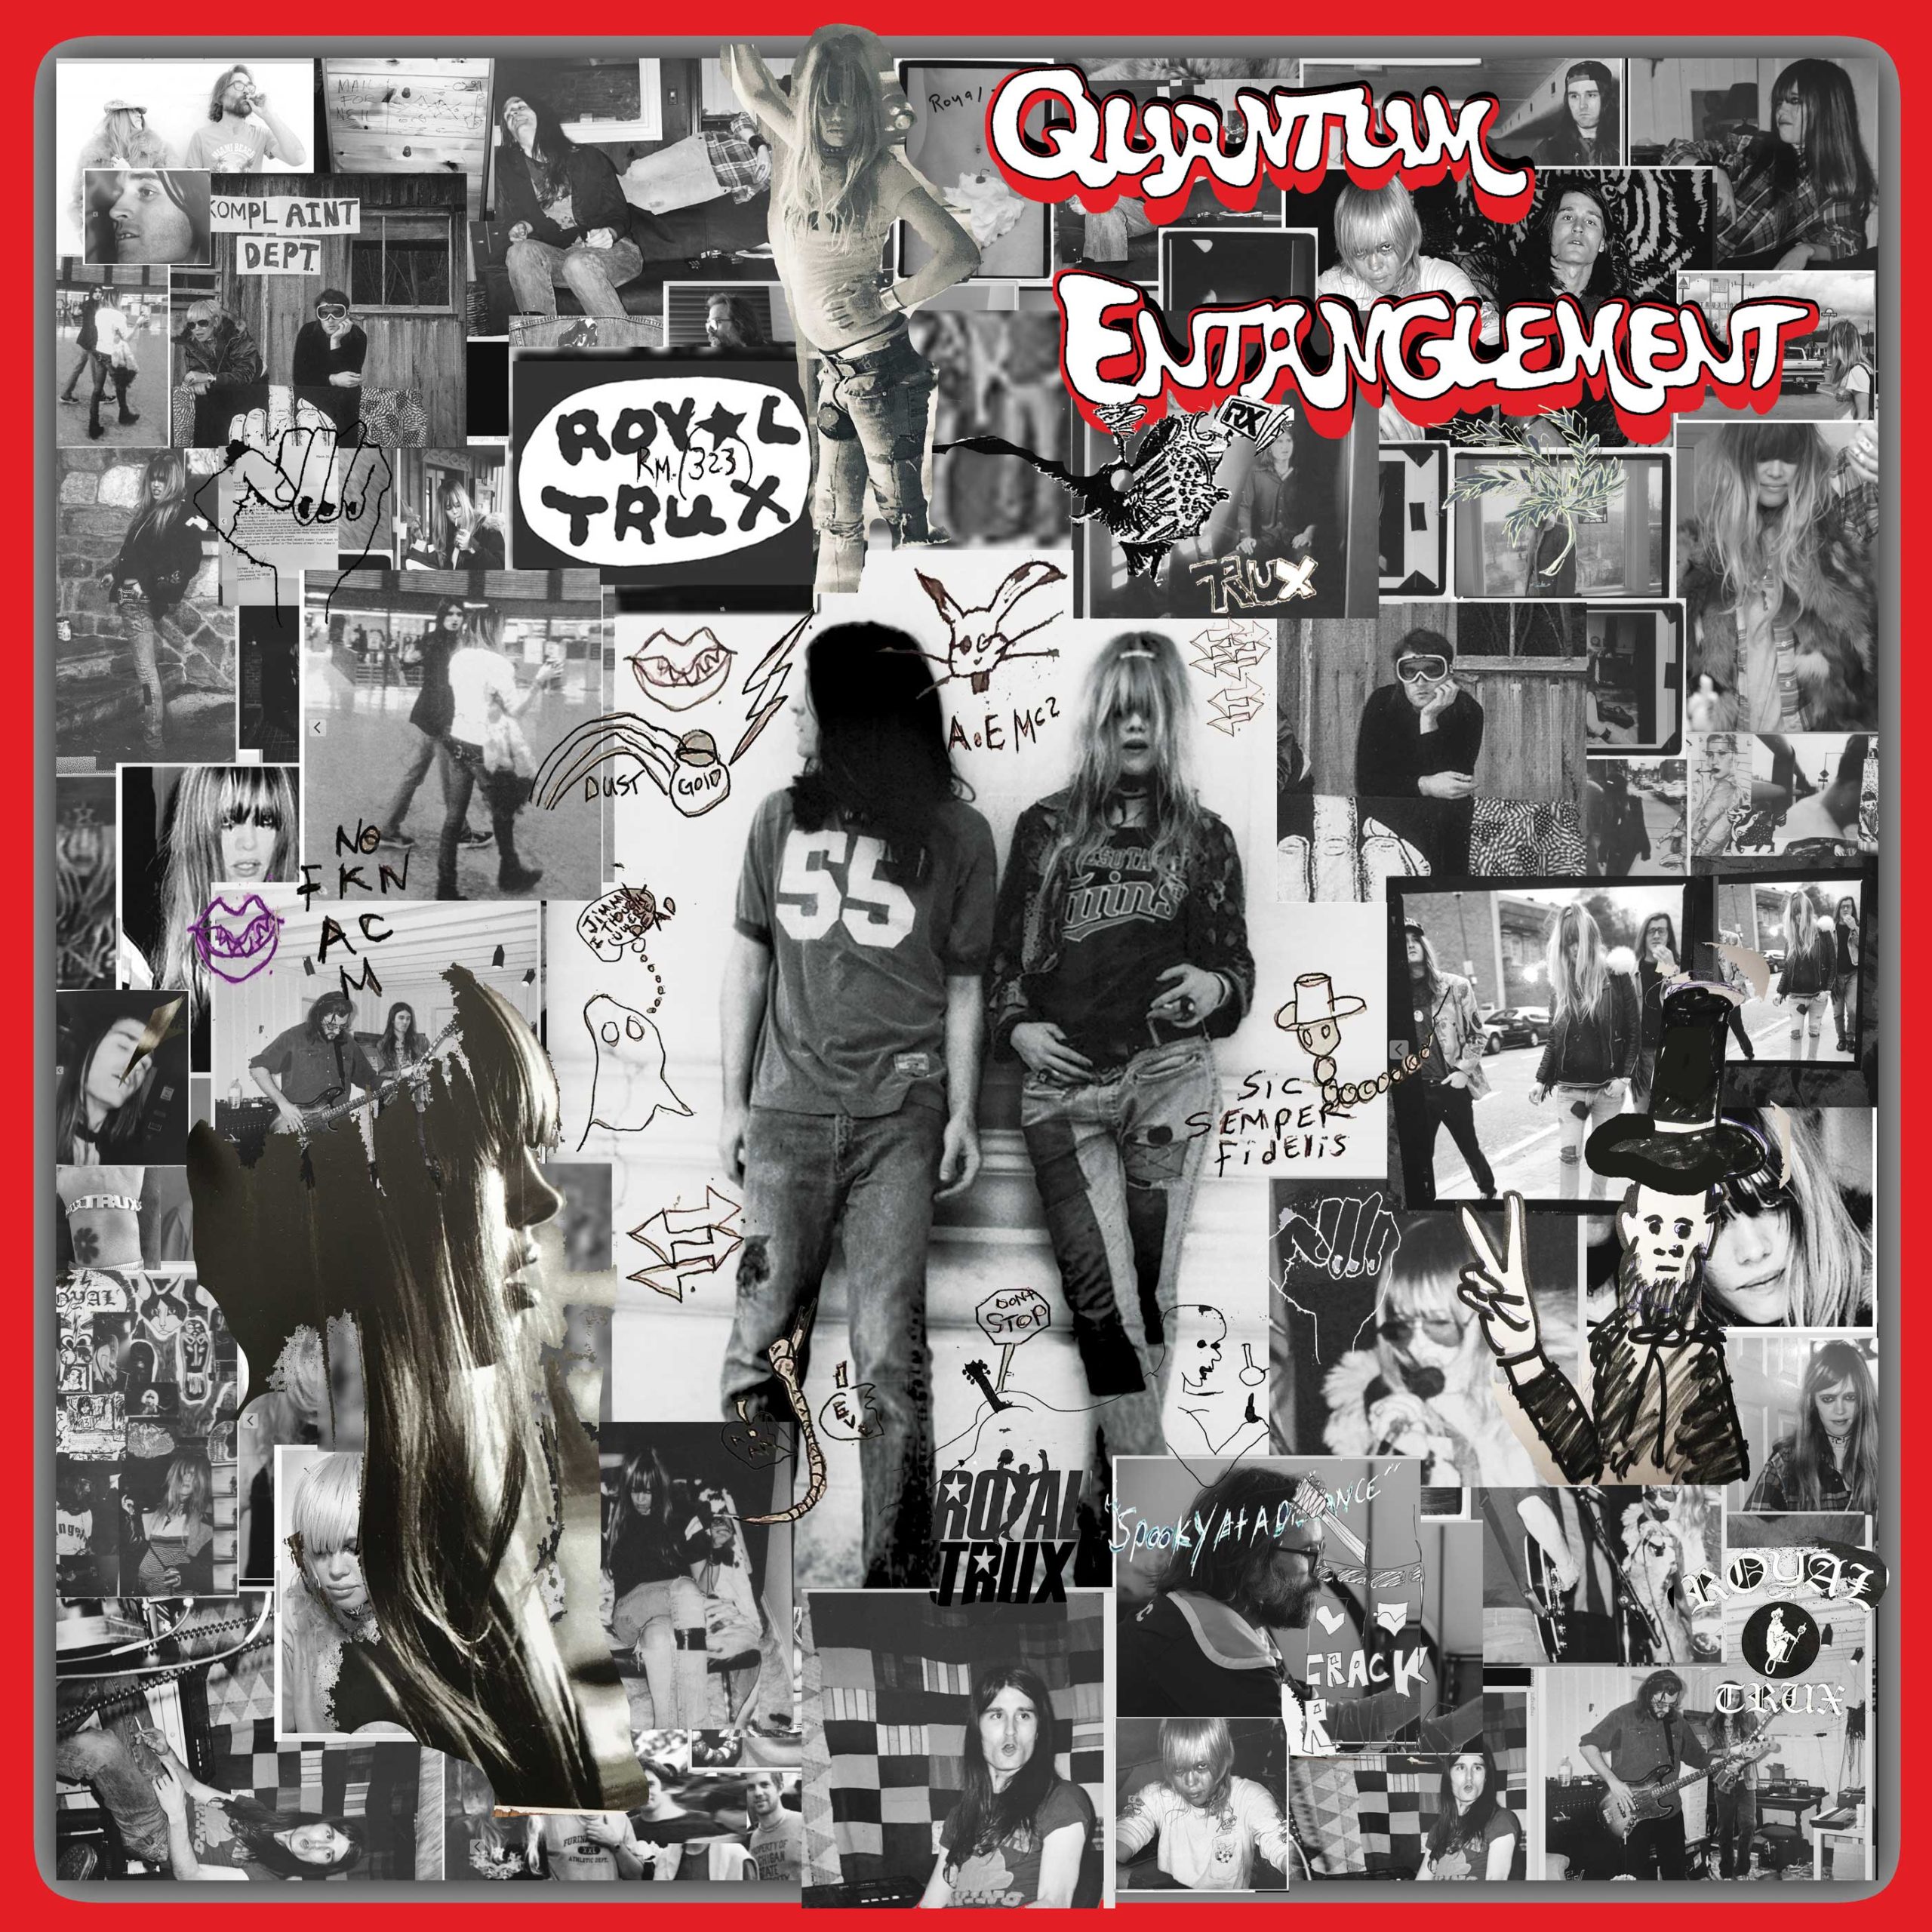 Fat Possum announces Royal Trux 14-track career-spanning collection titled ‘Quantum Entanglement’ for Record Store Day Black Friday